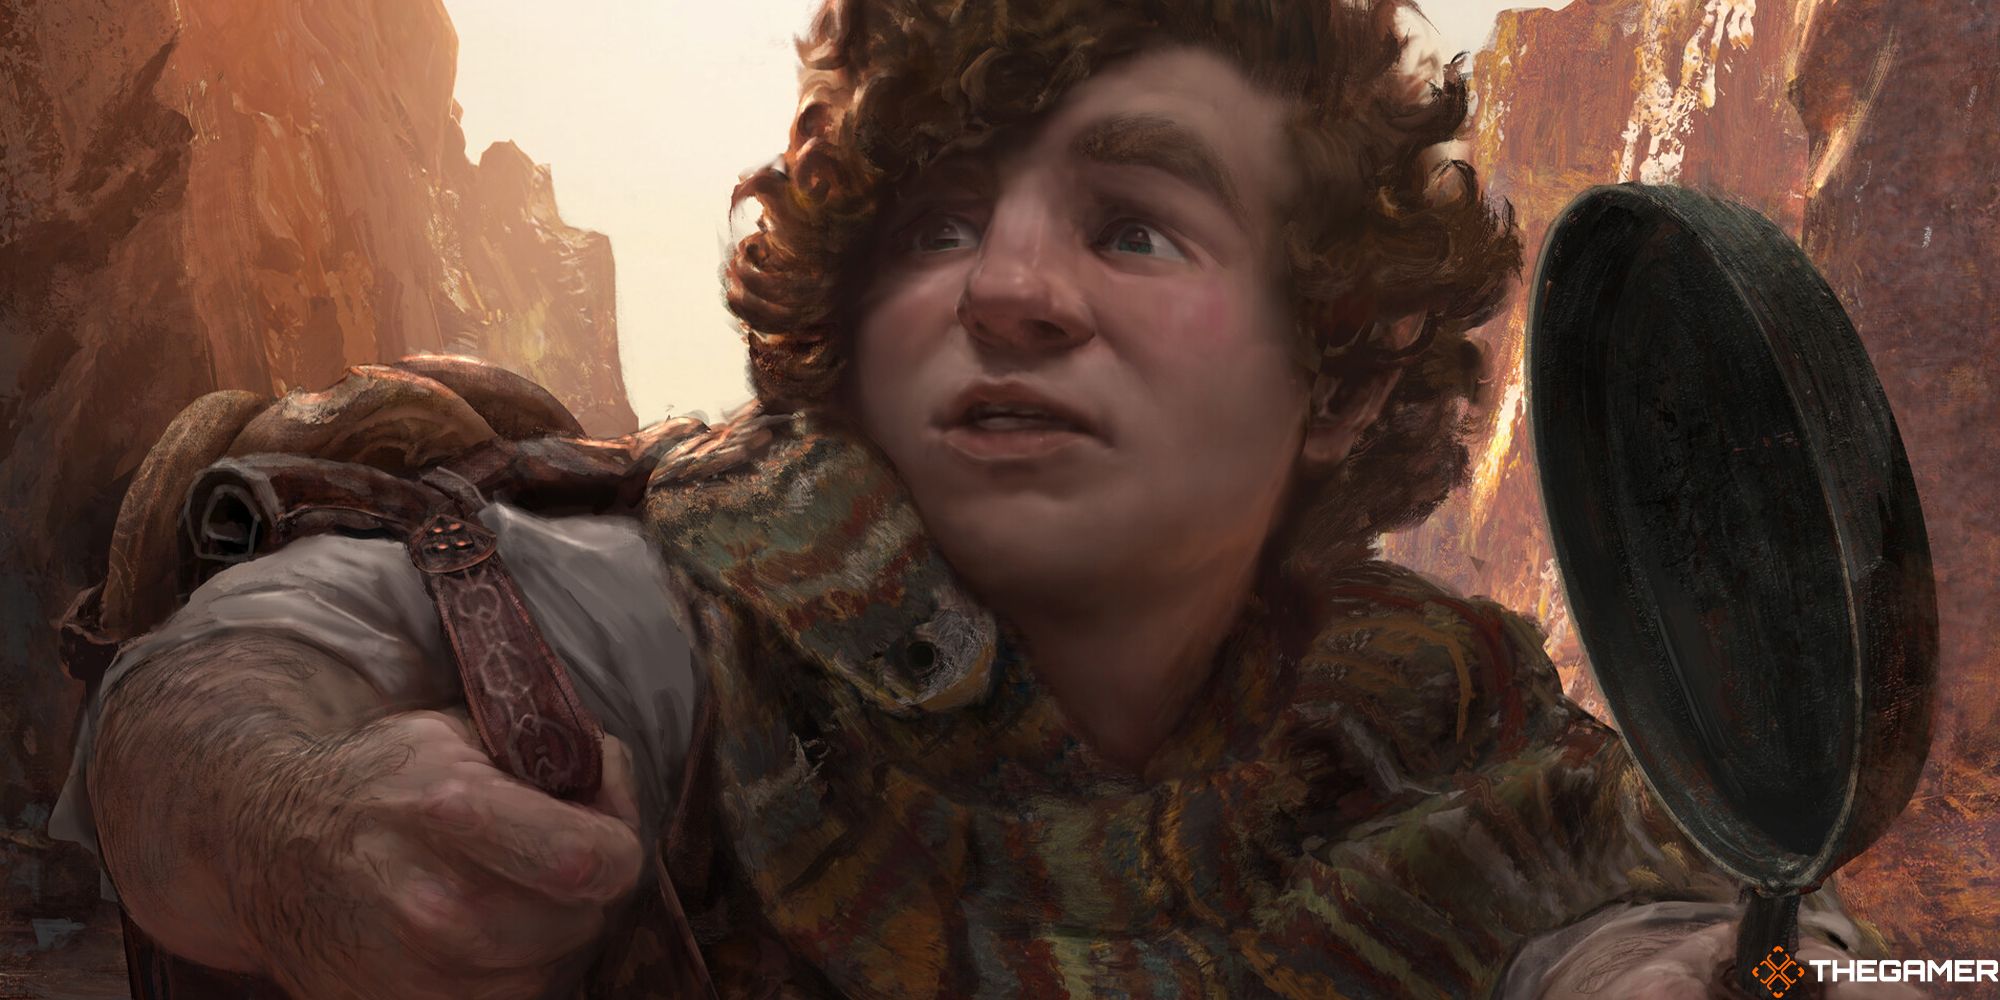 Samwise from LOTR in MTG